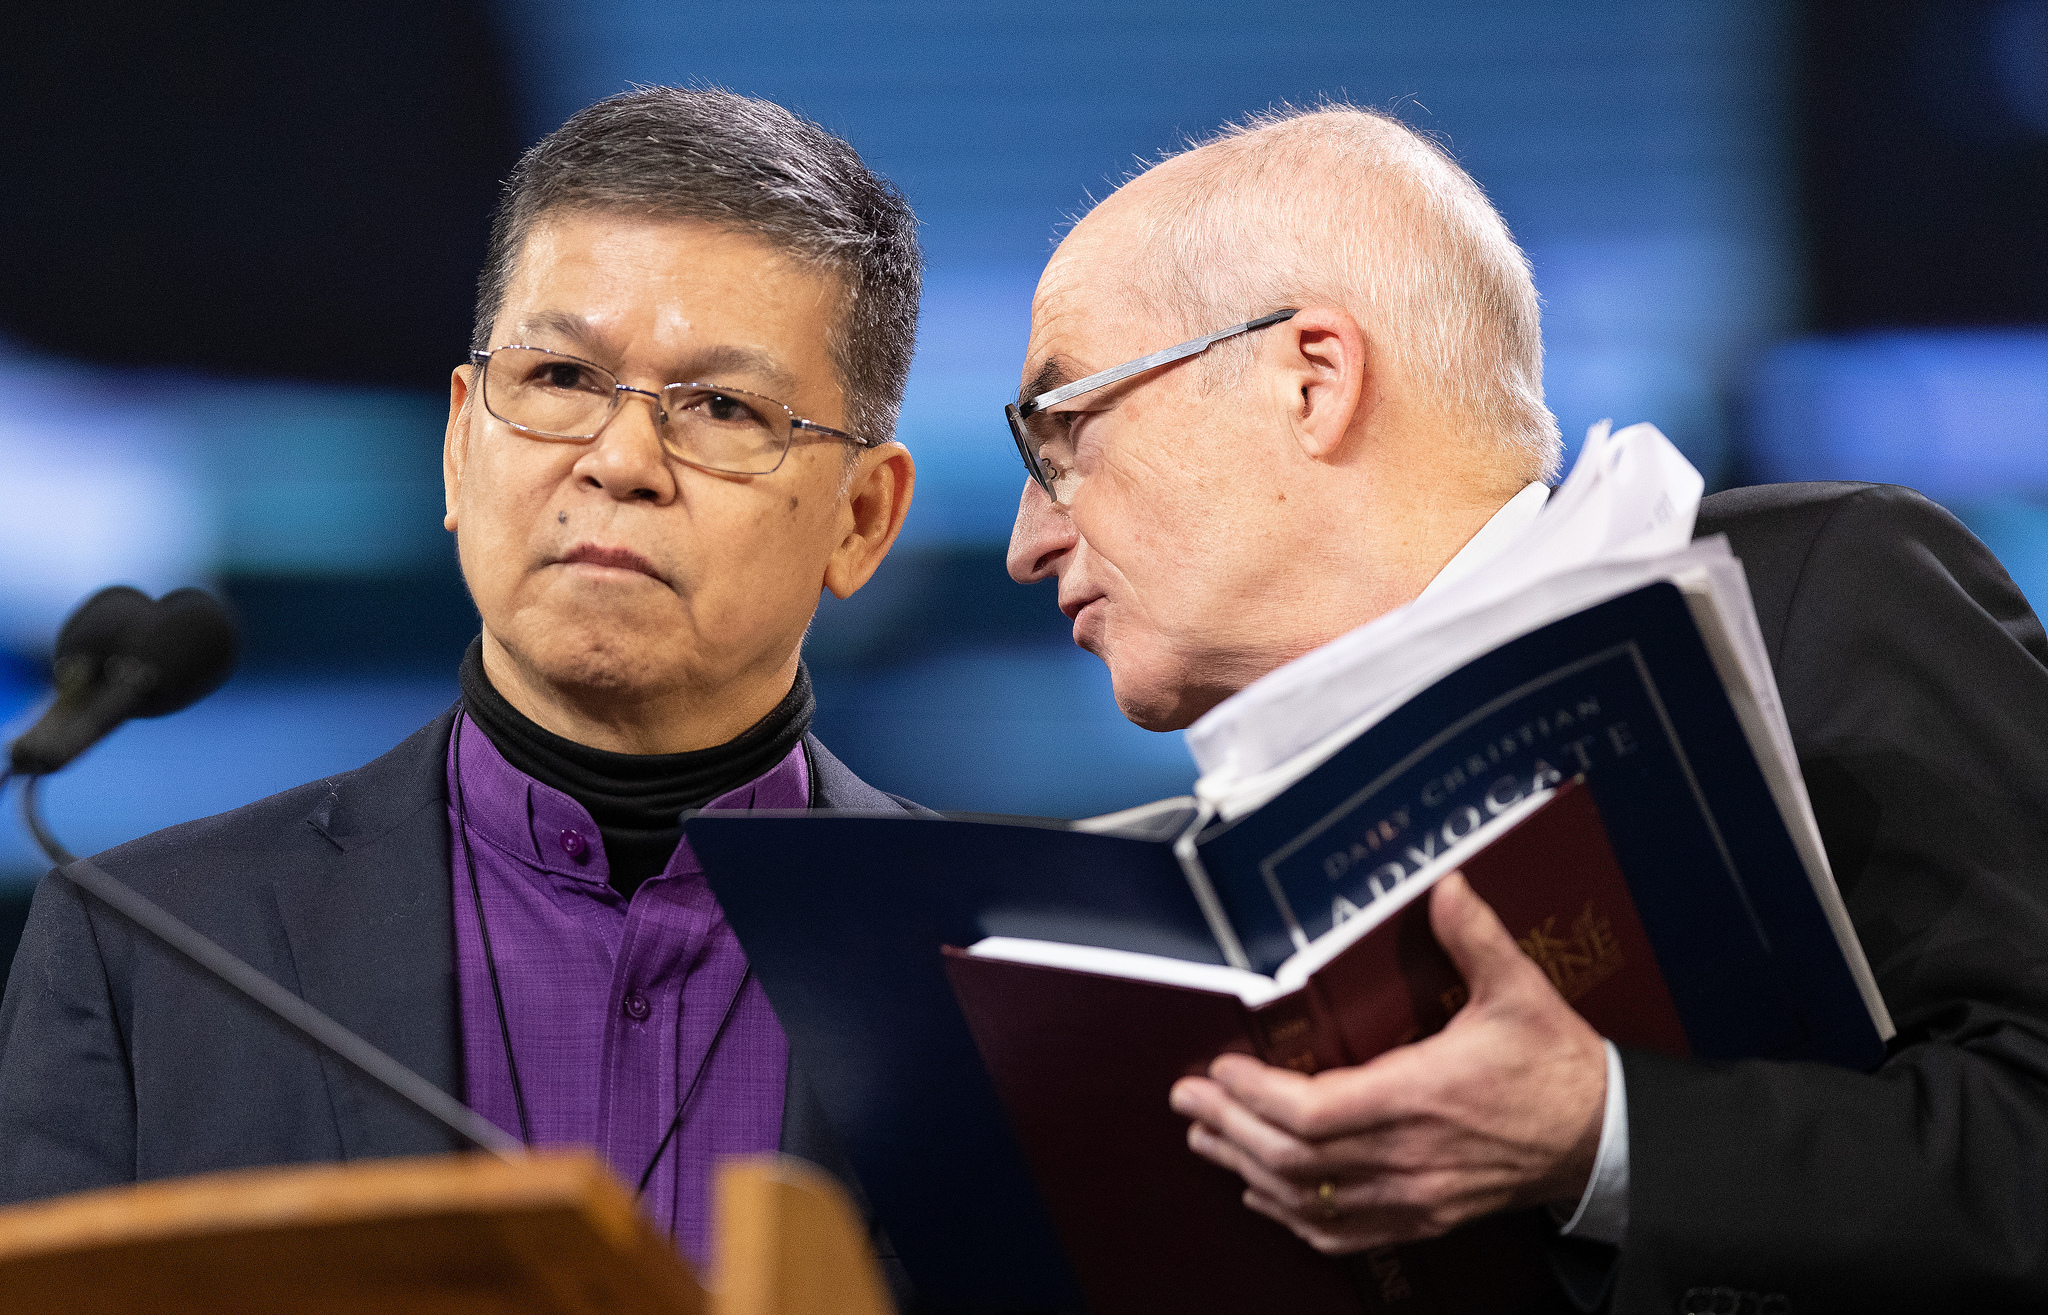 Bishops Ciriaco Q. Francisco (left) and Patrick Streiff confer at the podium during the 2019 United Methodist General Conference in St. Louis. They both serve on the Standing Committee on Central Conference Matters. Photo by Mike DuBose, UMNS.